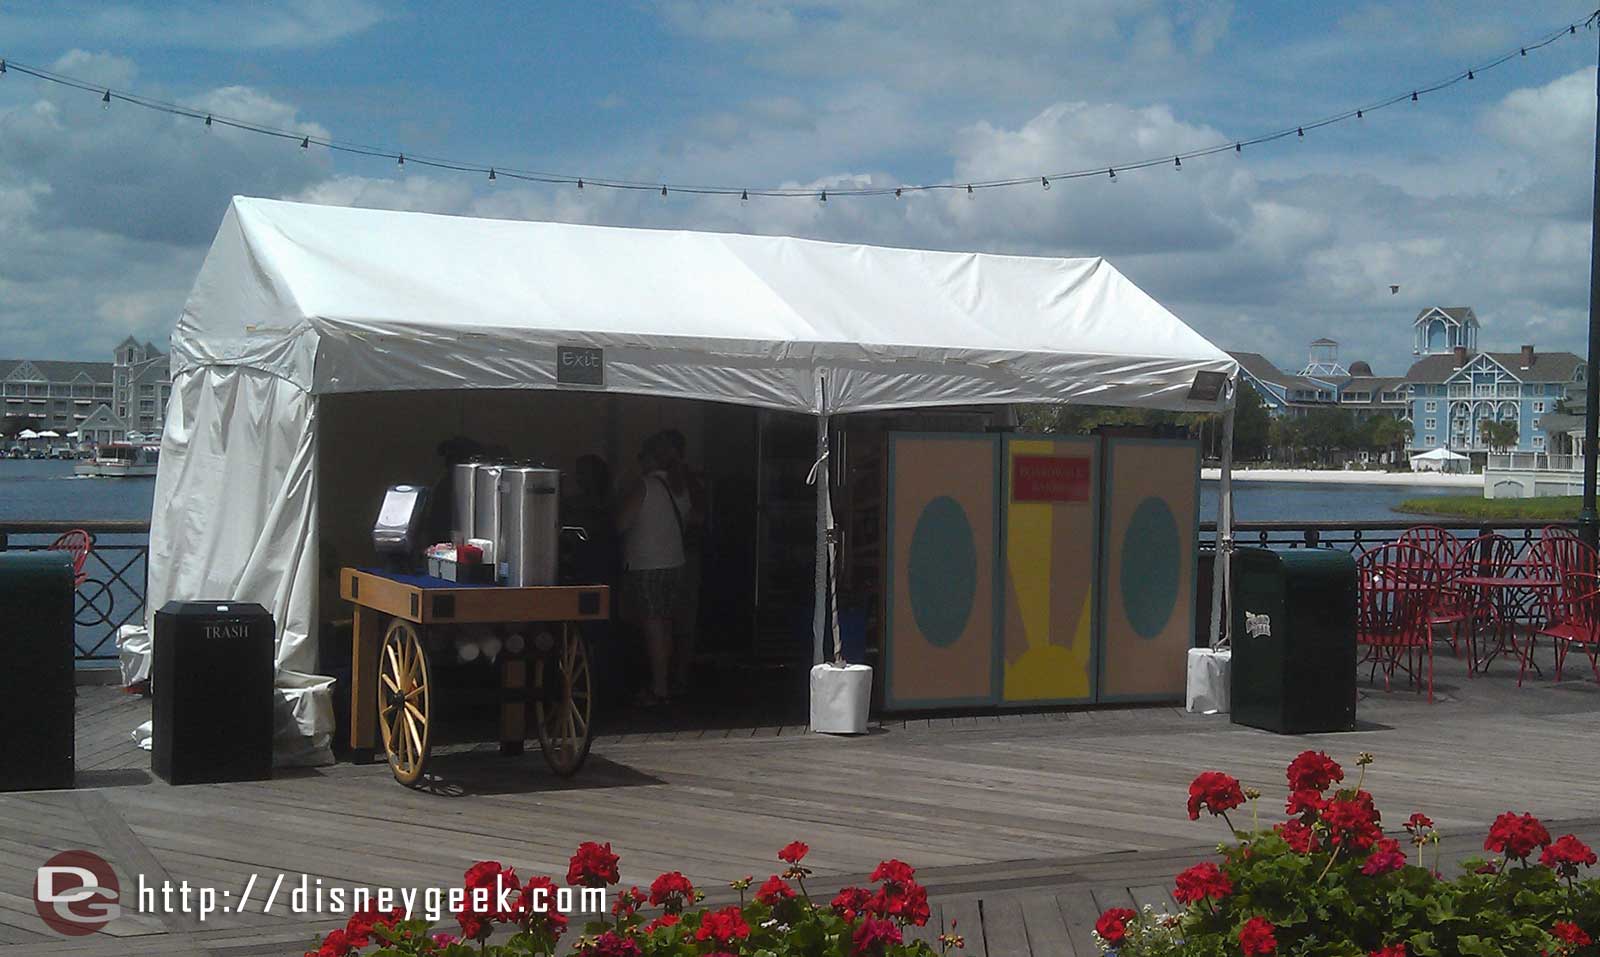 The Boardwalk Bakery is in a tent on the Boardwalk during rennovations